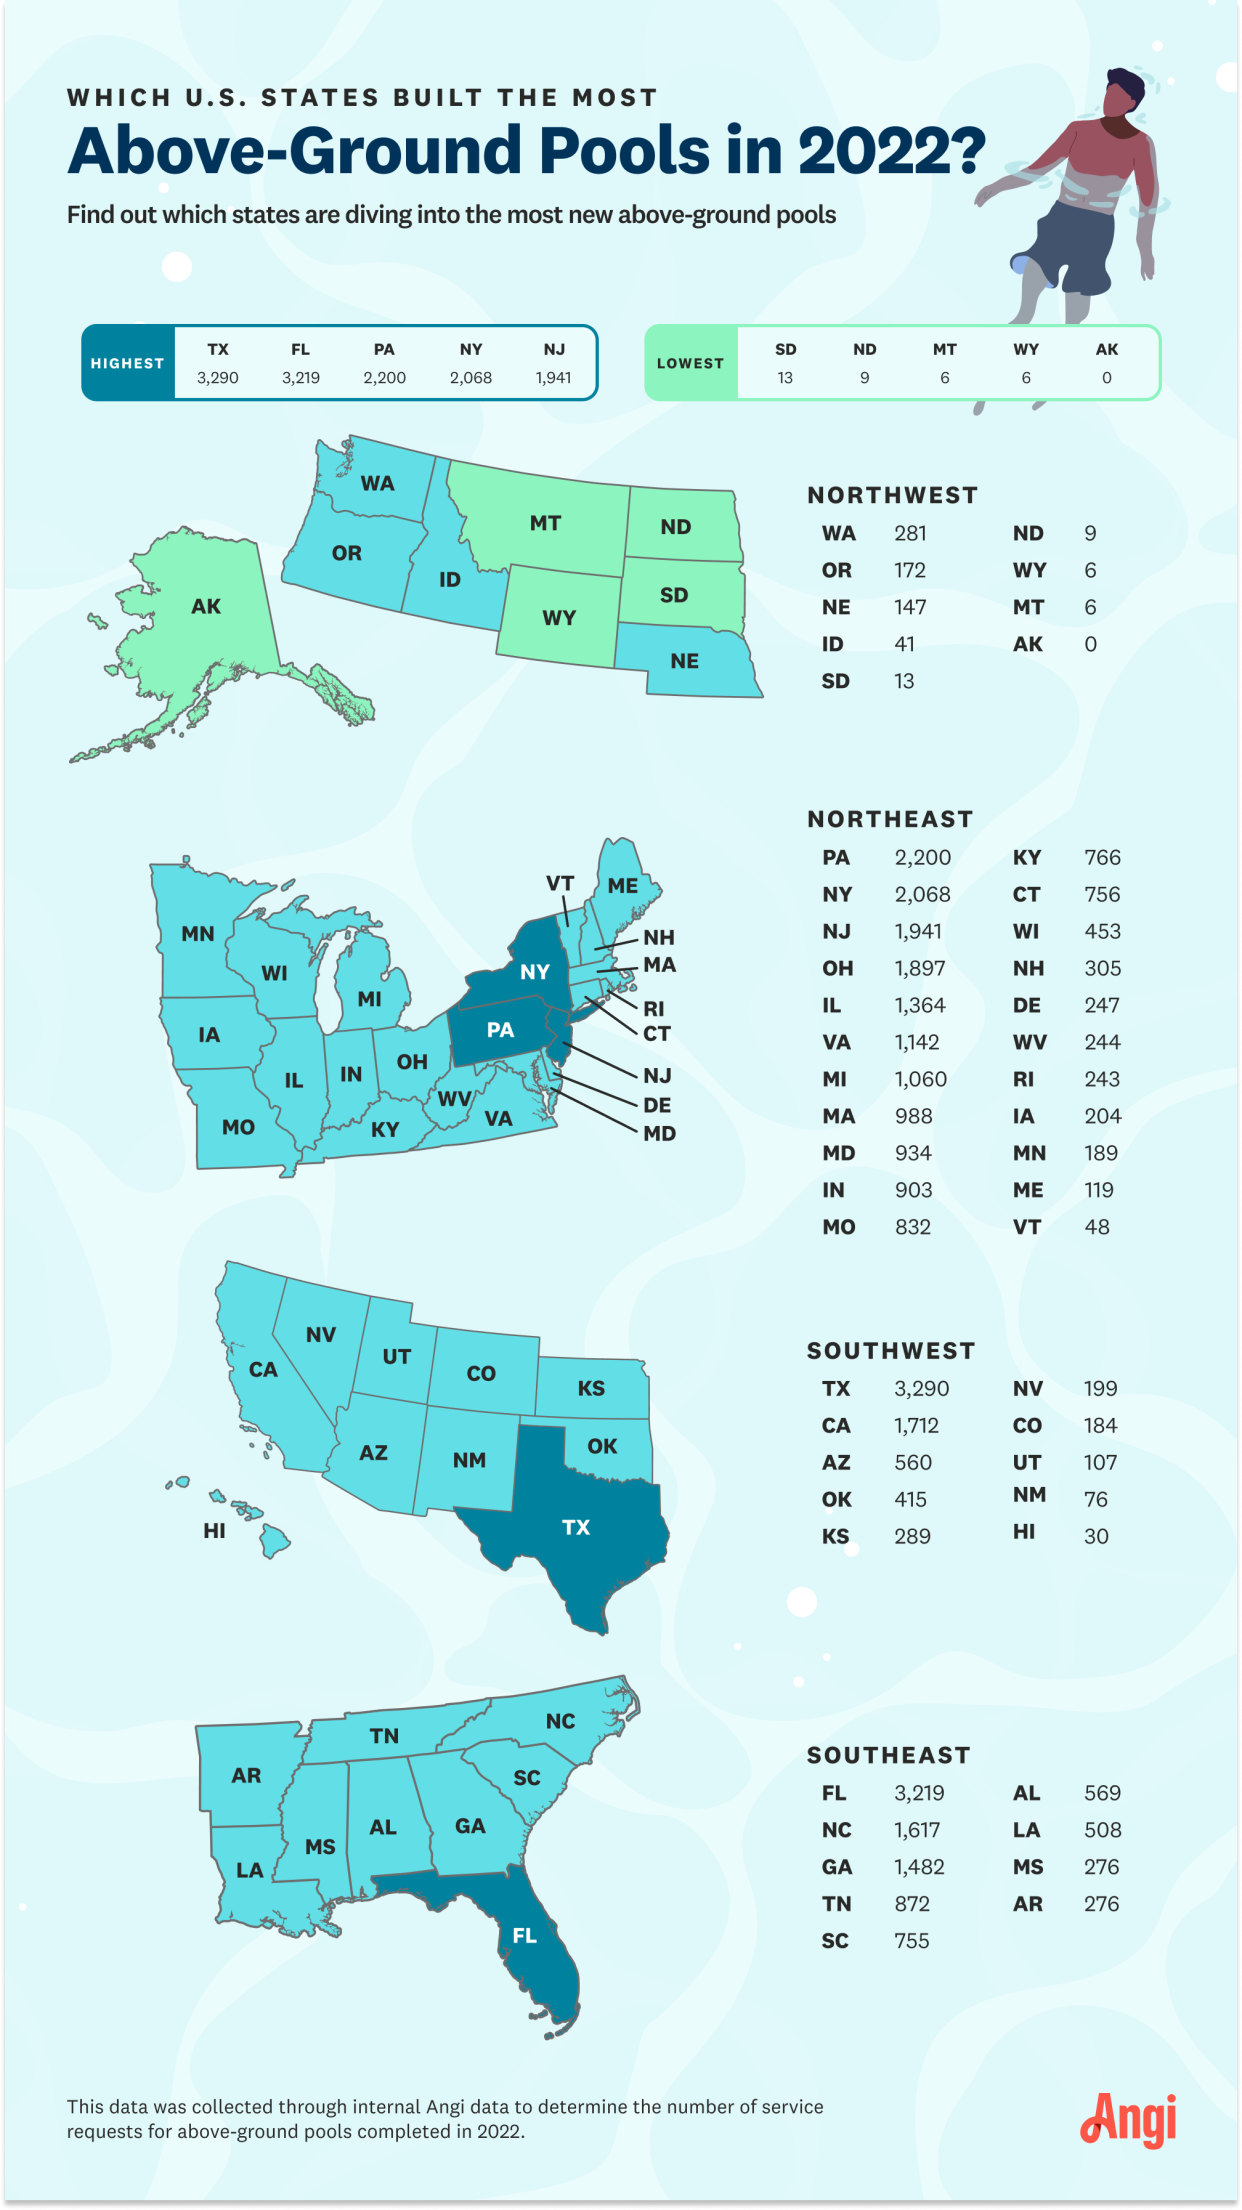 Infographic showing states with the most above-ground pools built in 2022, with the top 5 being Texas, Florida, Pennsylvania, New York, and New Jersey